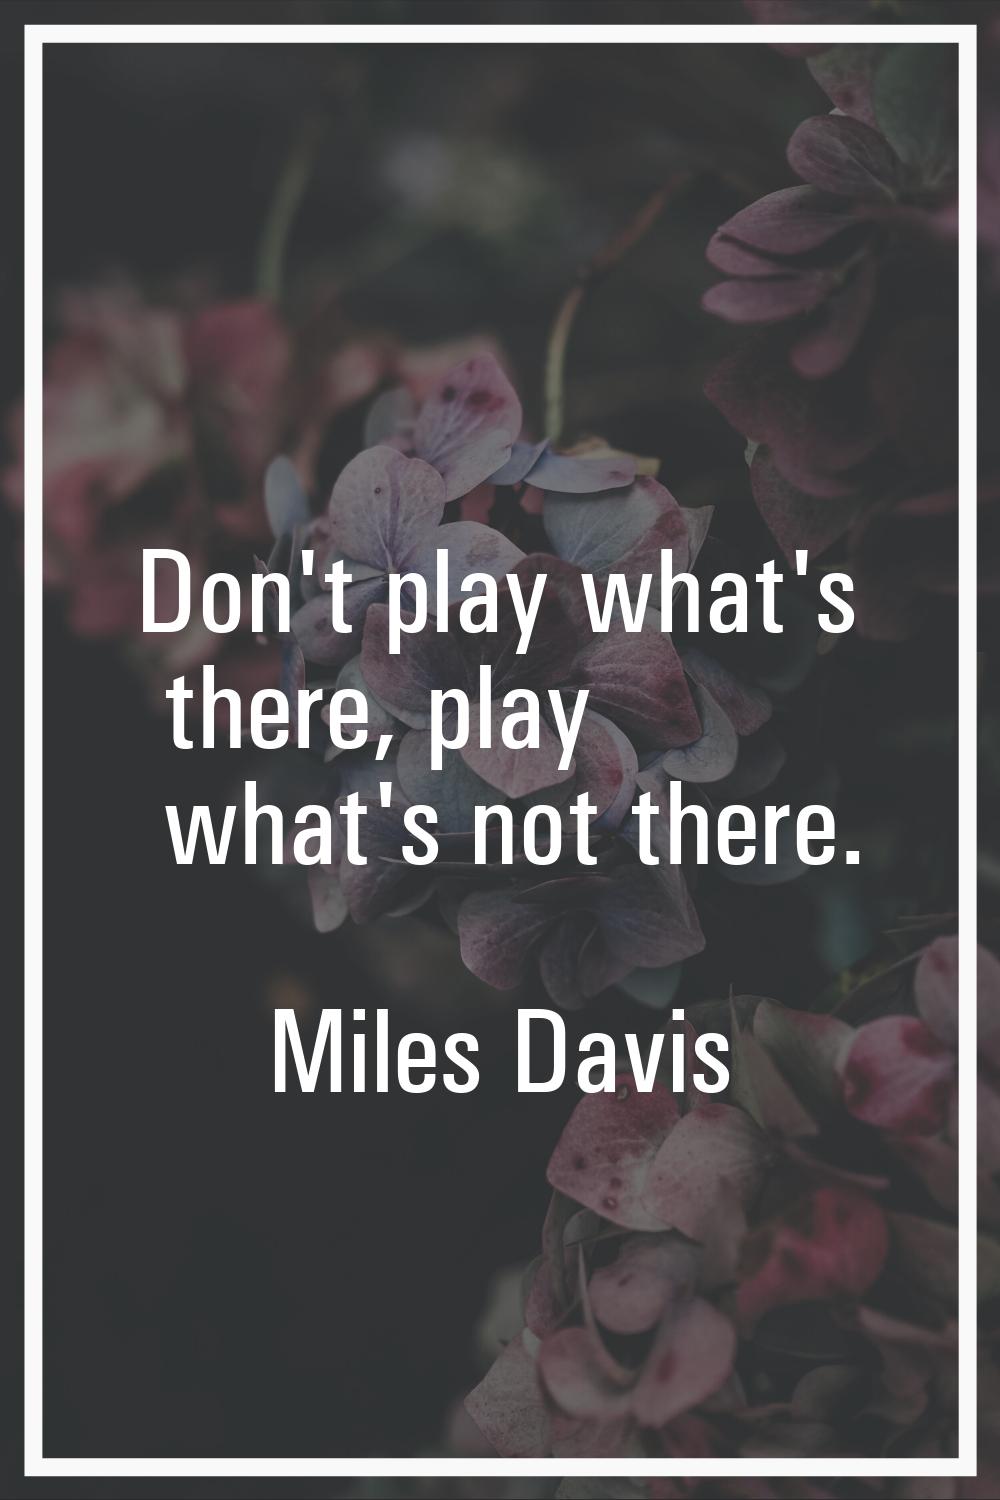 Don't play what's there, play what's not there.